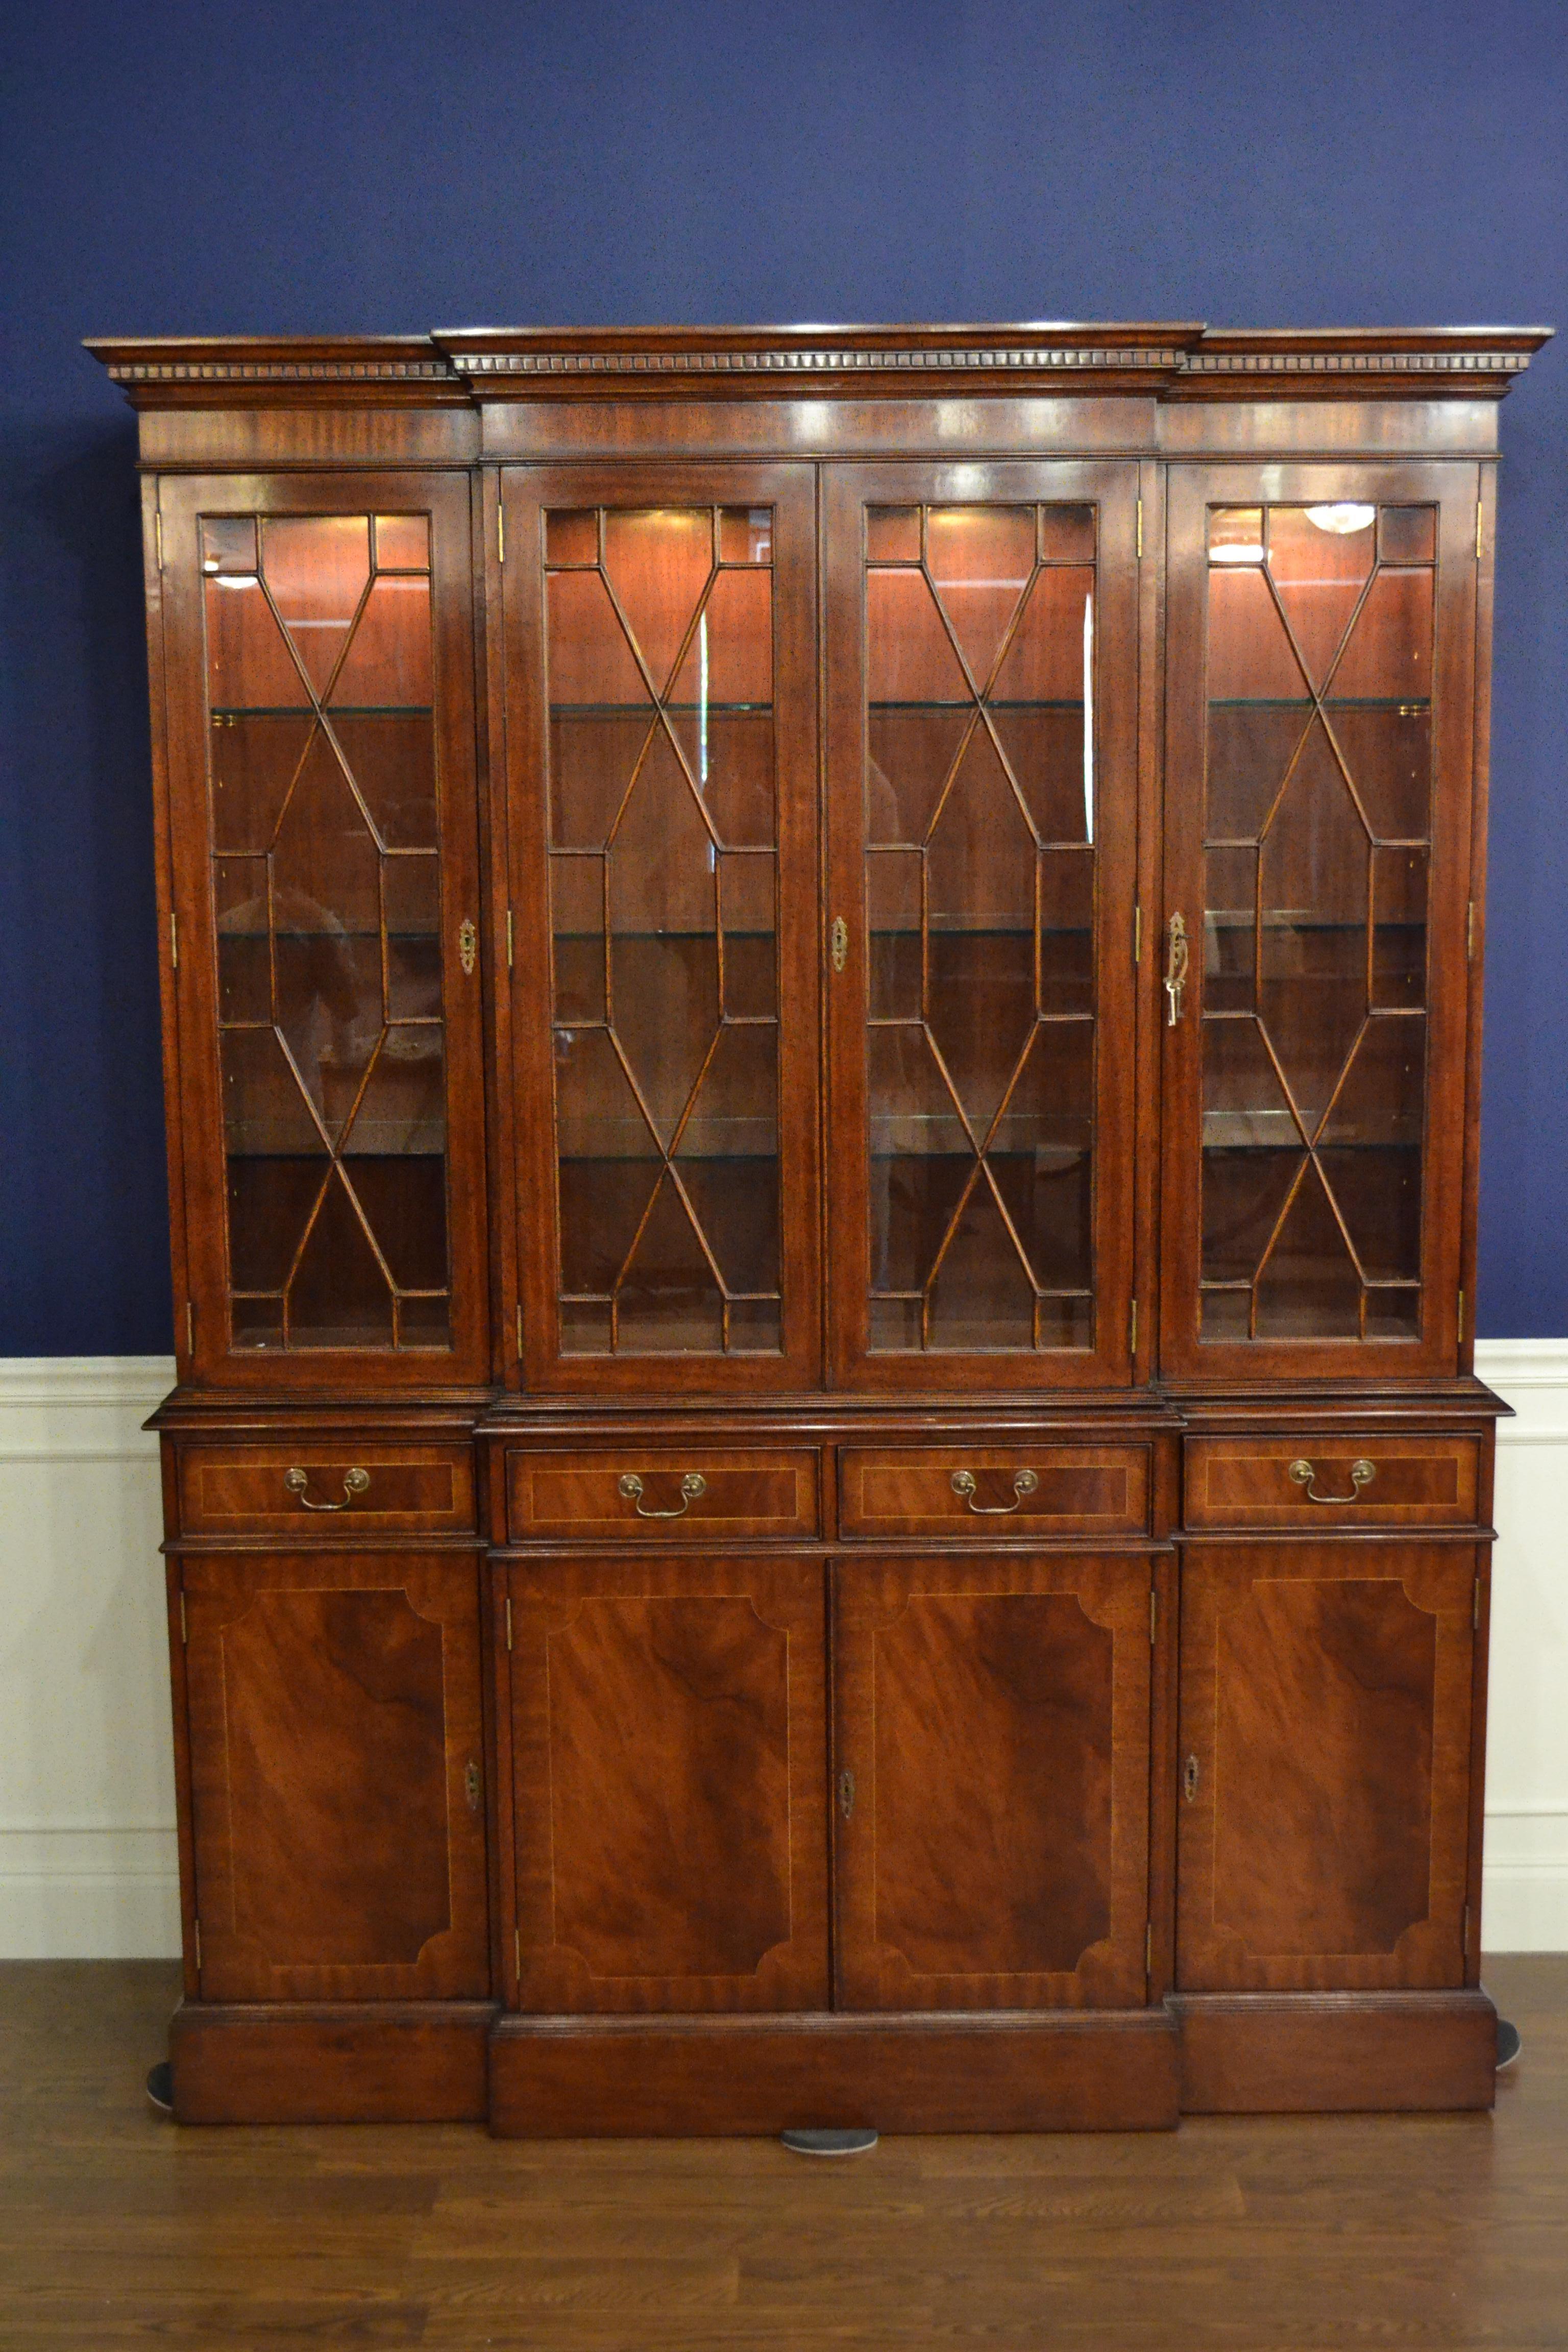 This a traditional mahogany breakfront bookcase or china cabinet with four doors by Leighton Hall. It features four bottom doors with swirly crotch mahogany fields and straight grain mahogany borders. The top four doors feature grills with